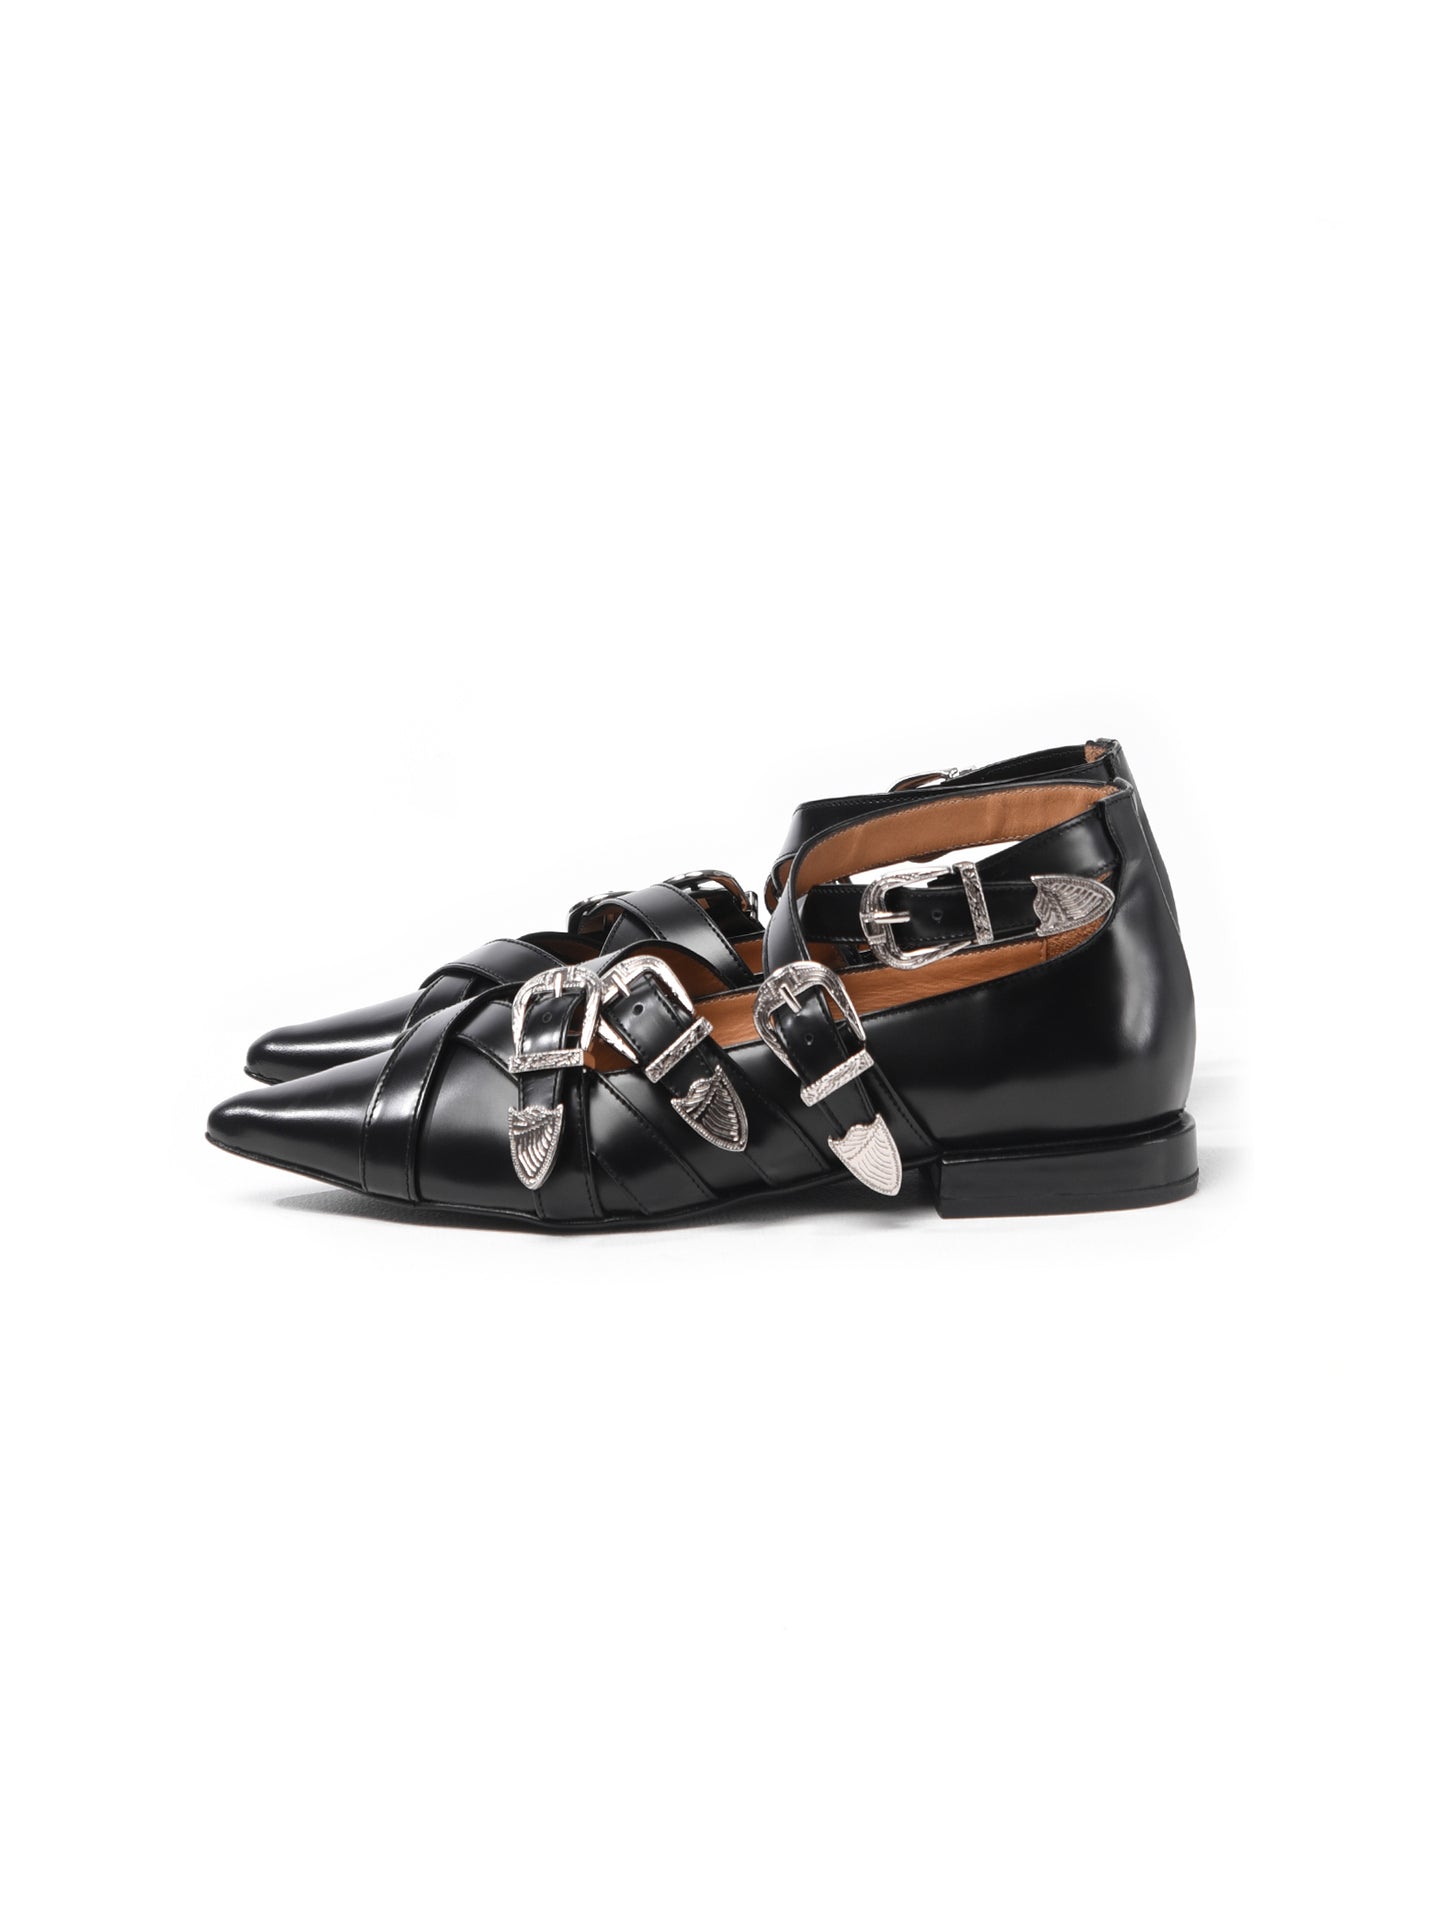 Toga Pulla Buckle Pointed Flats